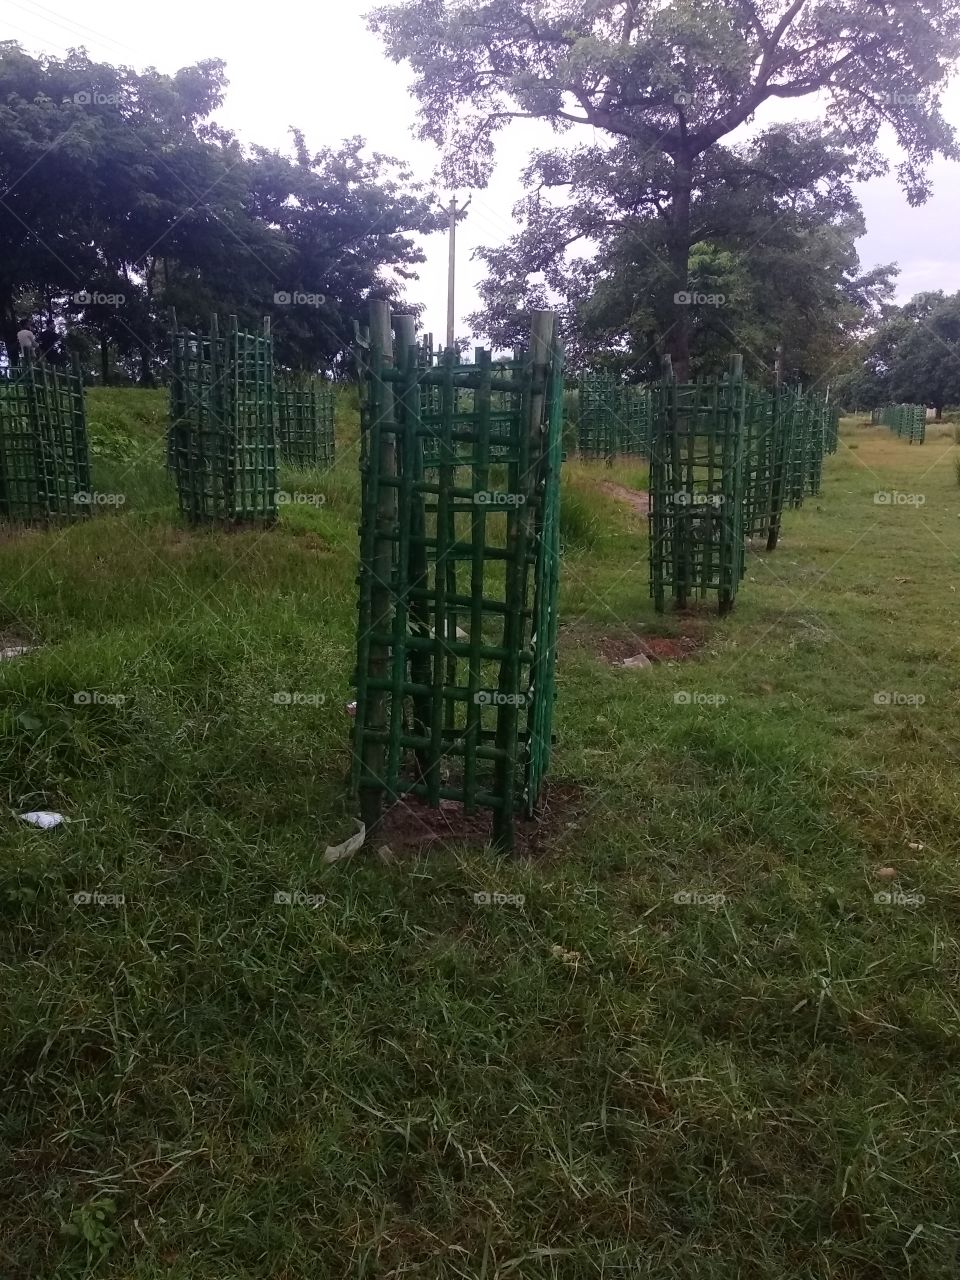 Environmental protection, plantation for environment,small plant in a school field,plantation with security,grassland field.